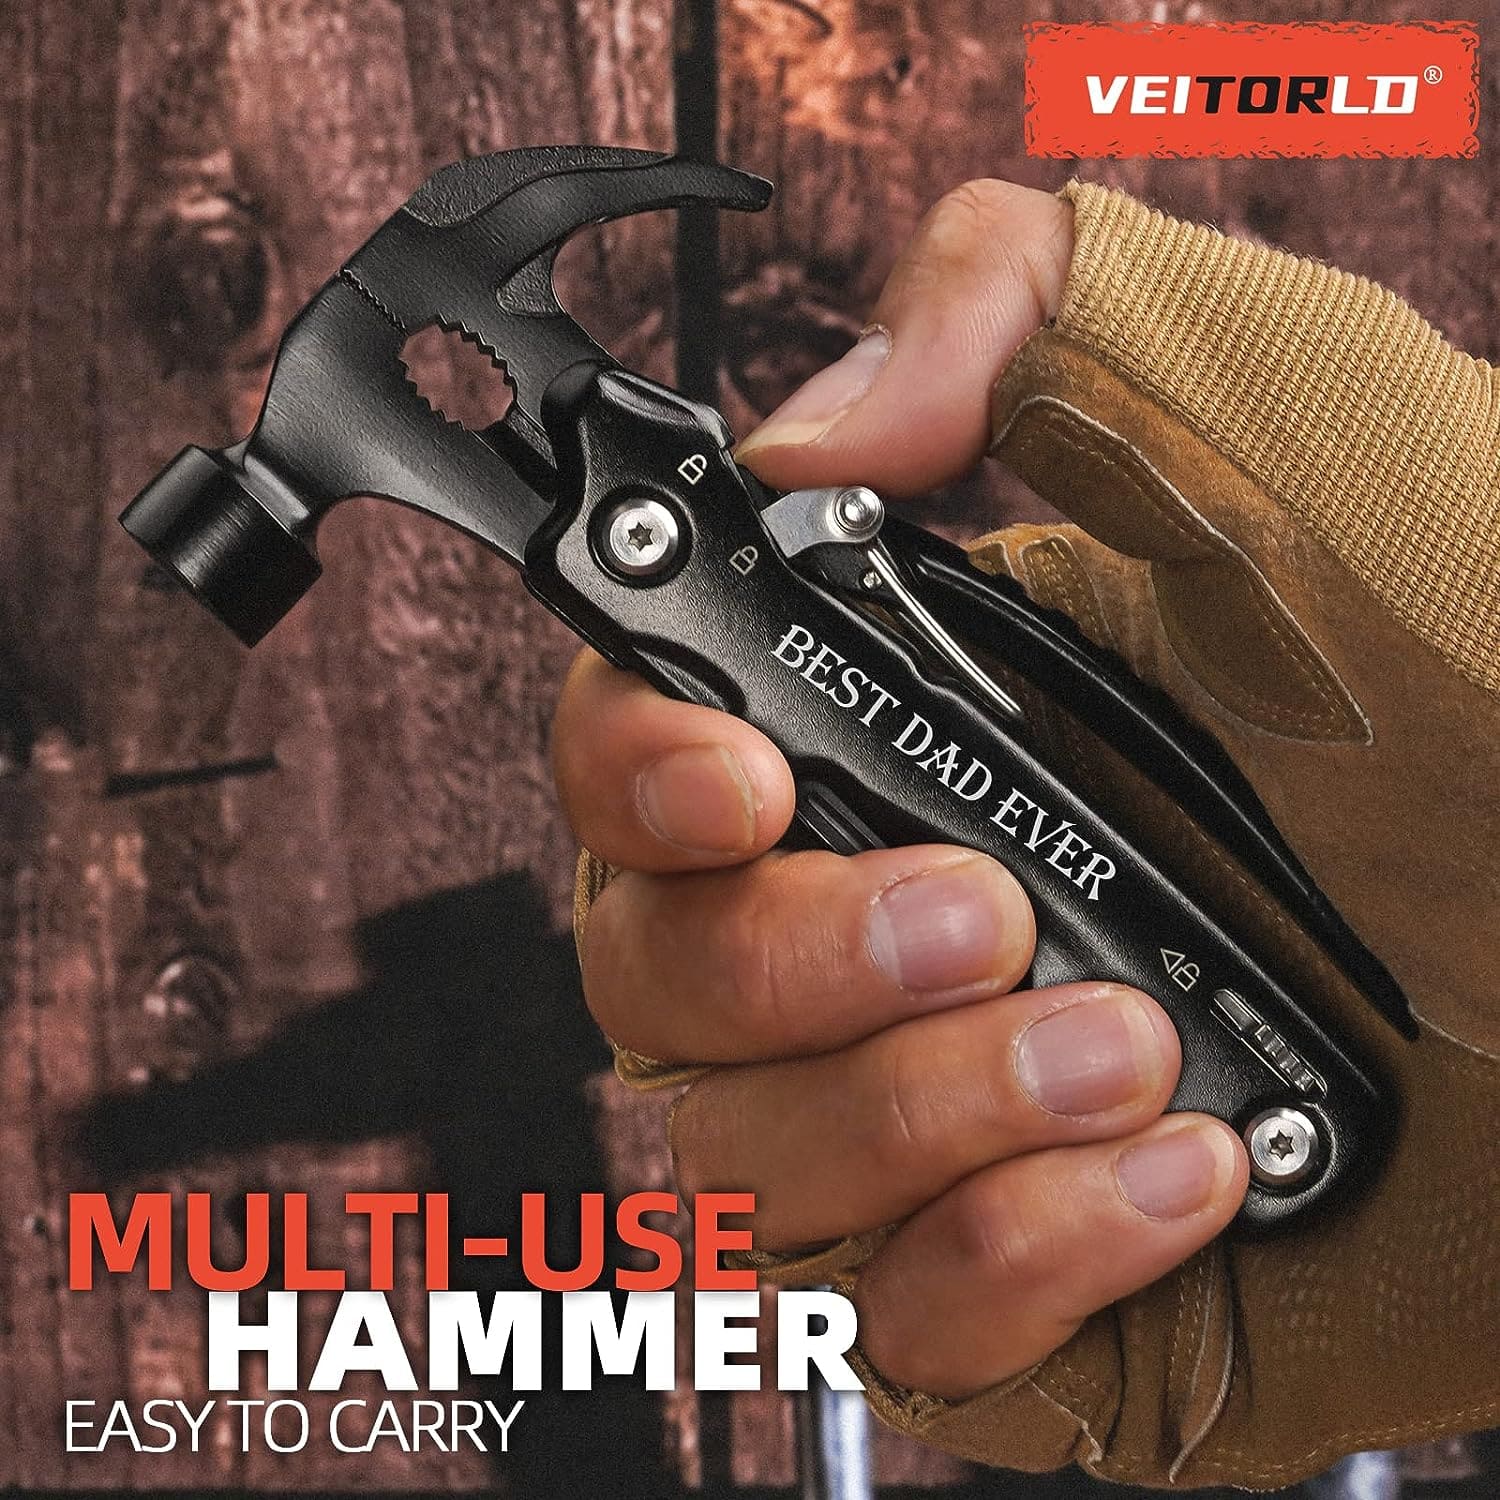 VEITORLD All in One Tools Hammer Multitool, Dad India